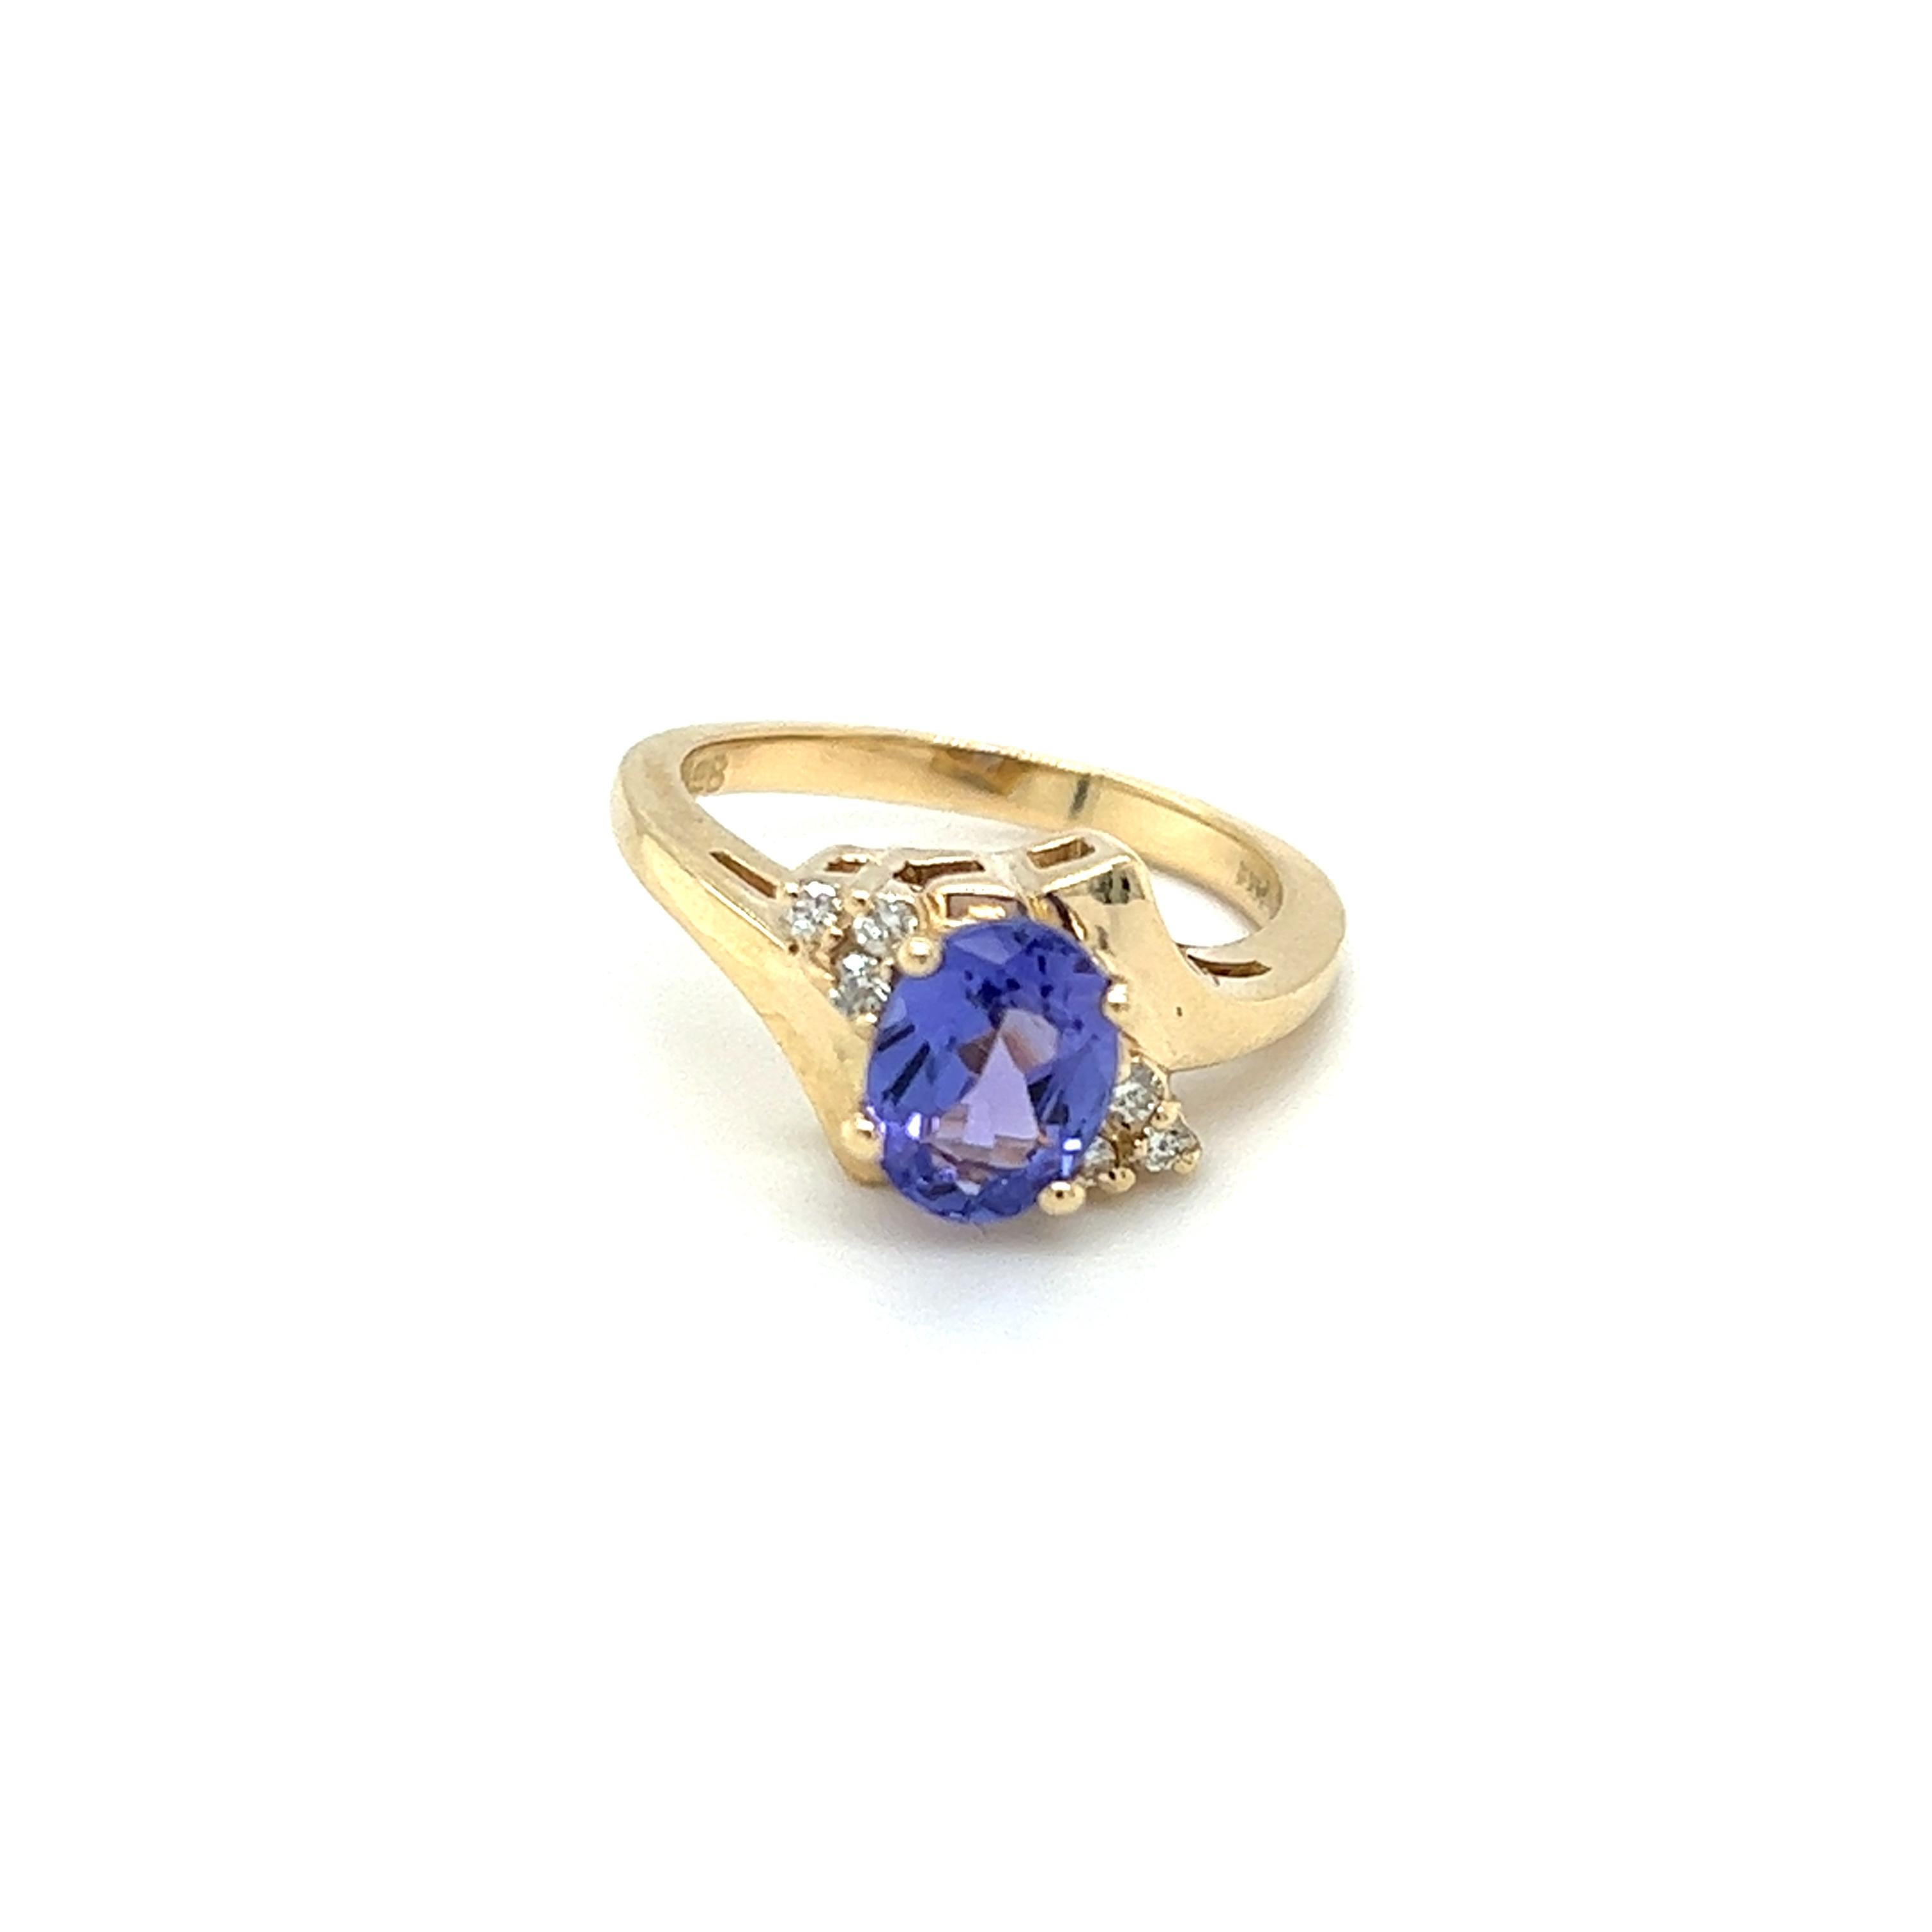 One 14 karat yellow gold (stamped 14K) bypass design ring, set with one (1) 8x6mm oval tanzanite and six (6) brilliant cut diamonds, approximately 0.12 carat total weight with matching I/J color and SI1 clarity. The ring is a finger size 6.25 and